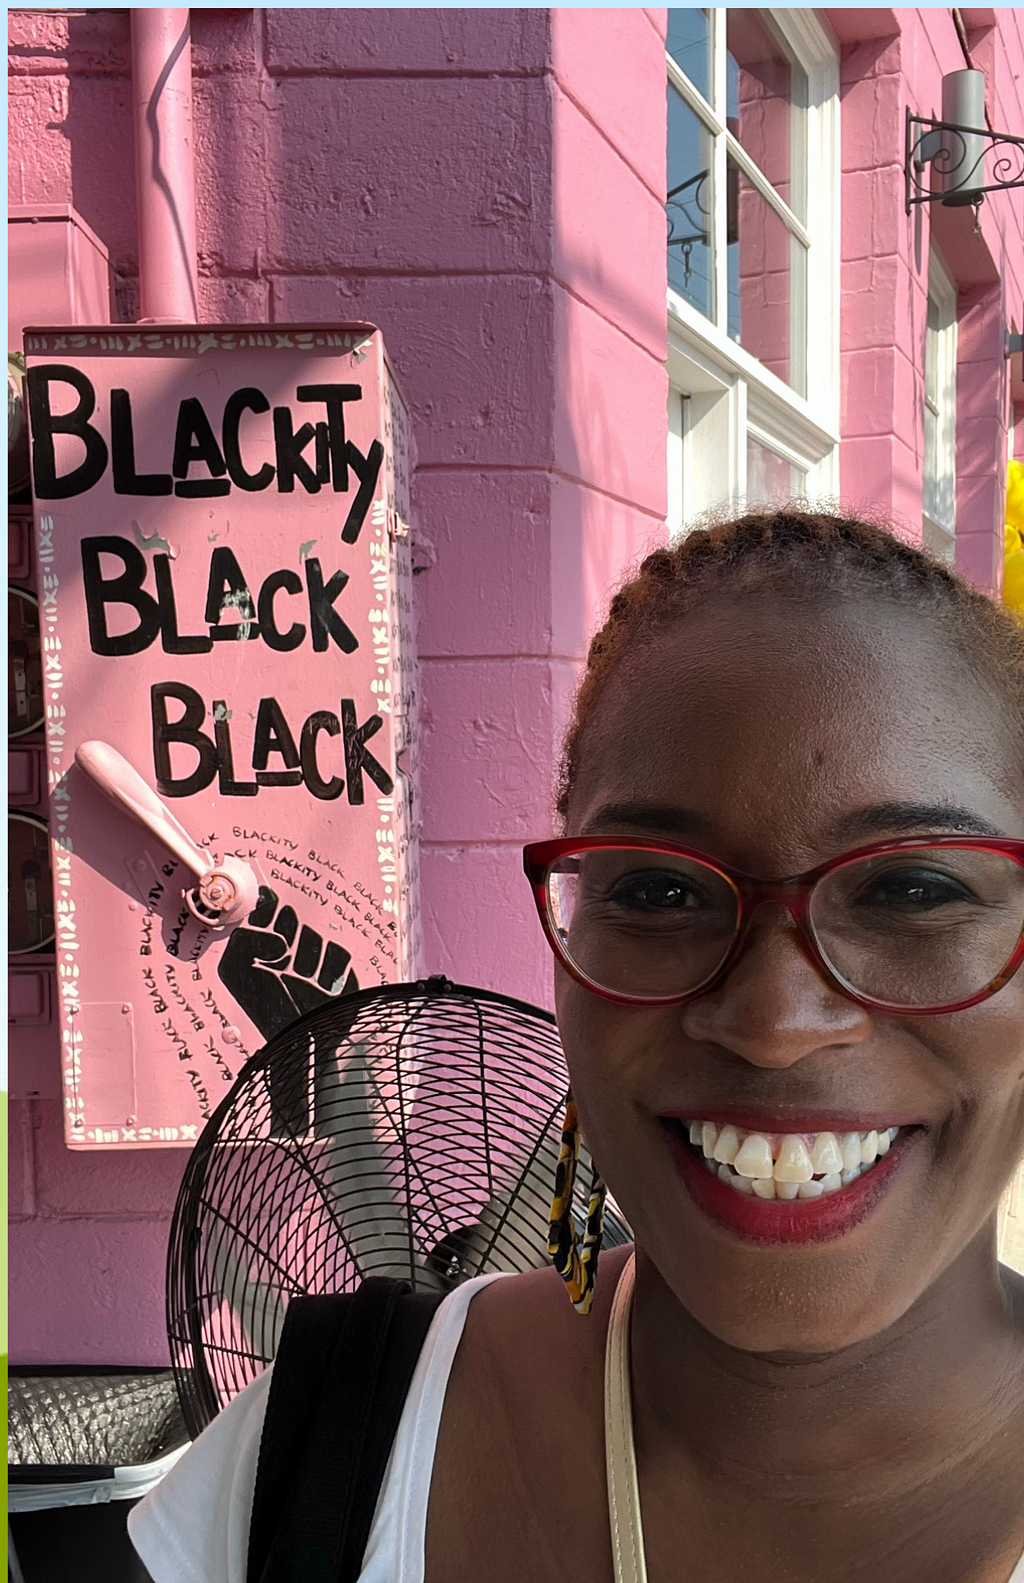 Black woman smiling in front of pink sign with black letters reading “Blackity Black Black”